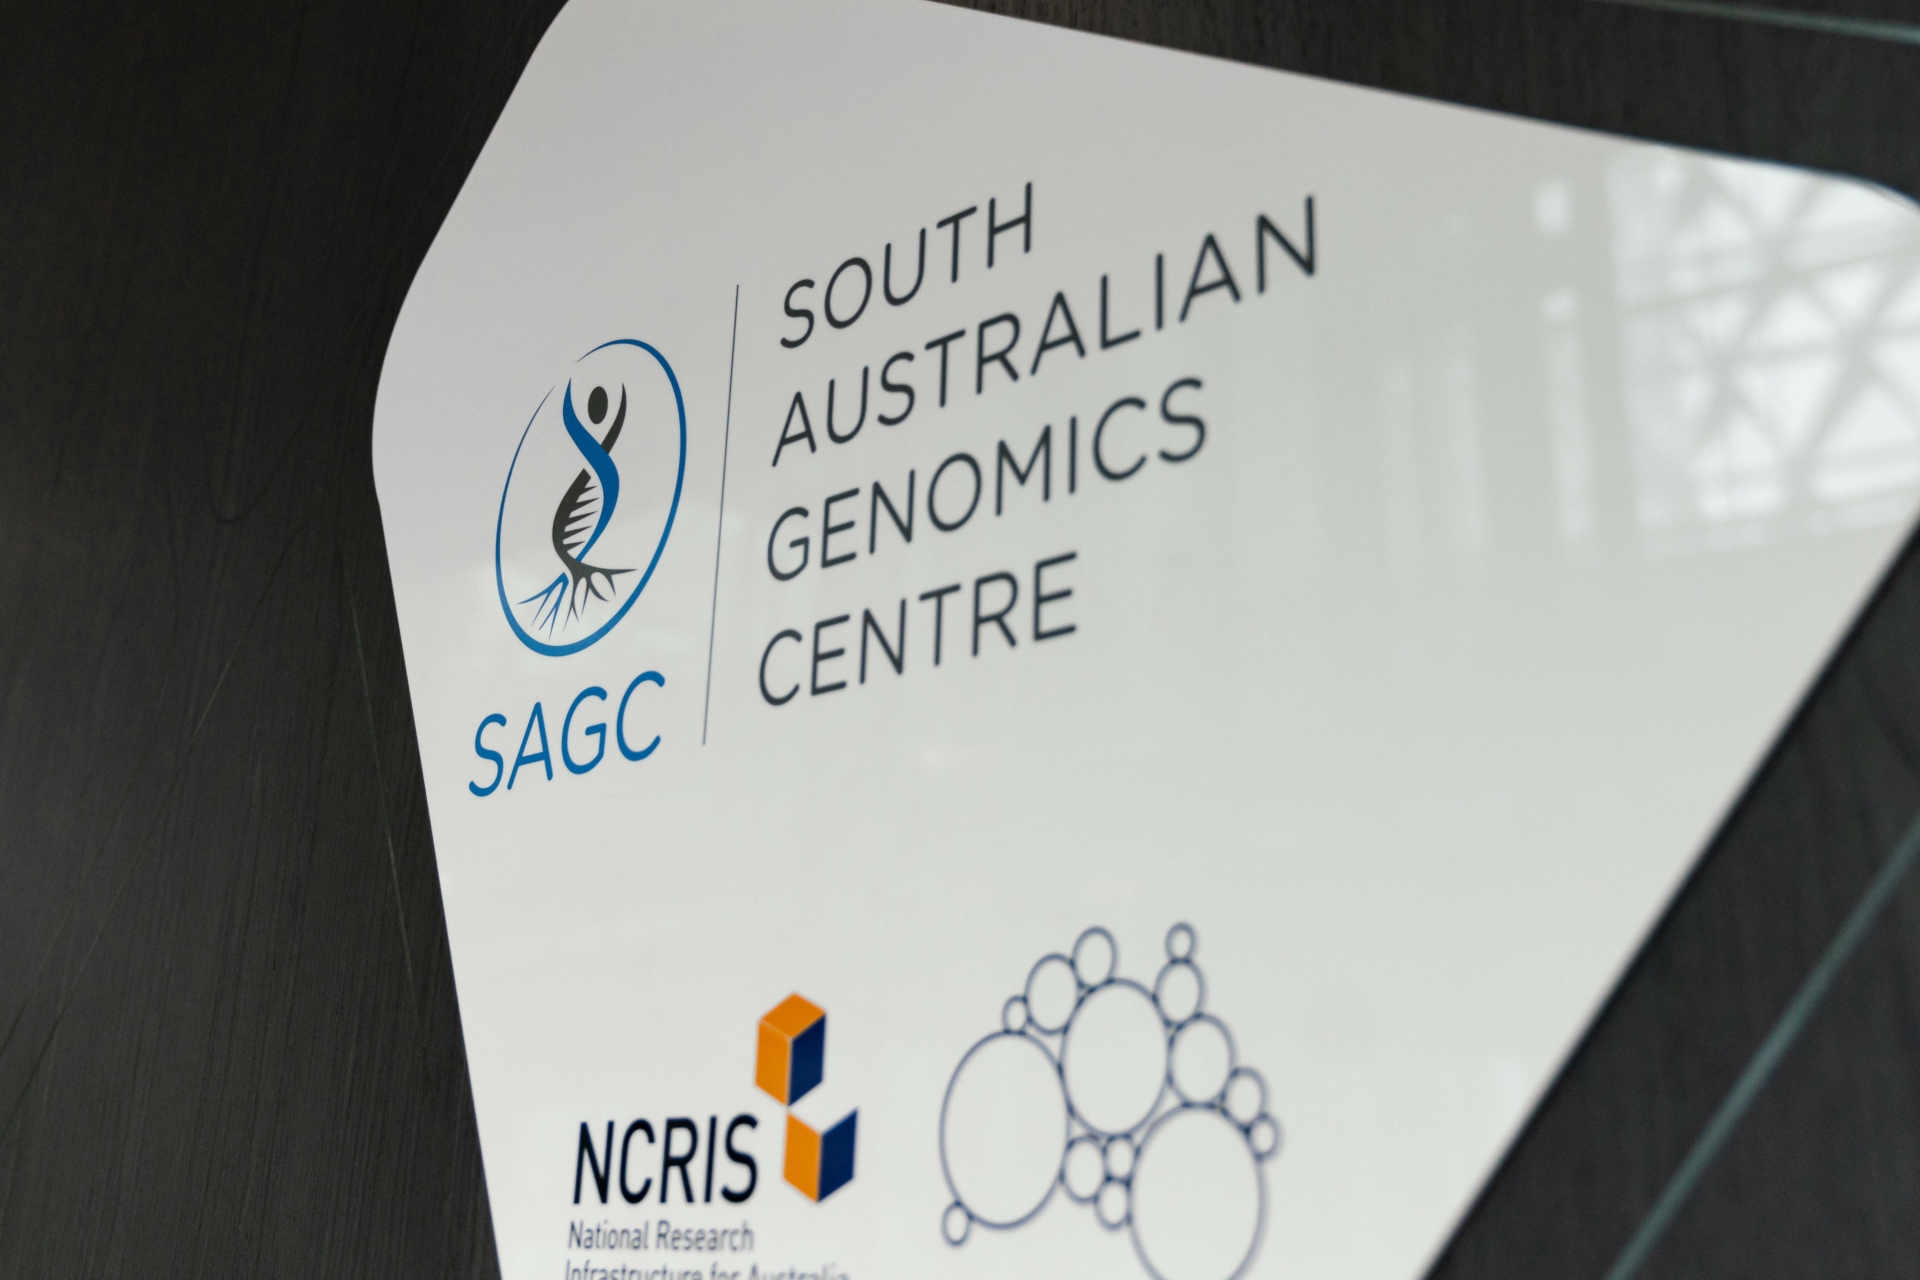 Major new funding helps secure the future of SA genomics research